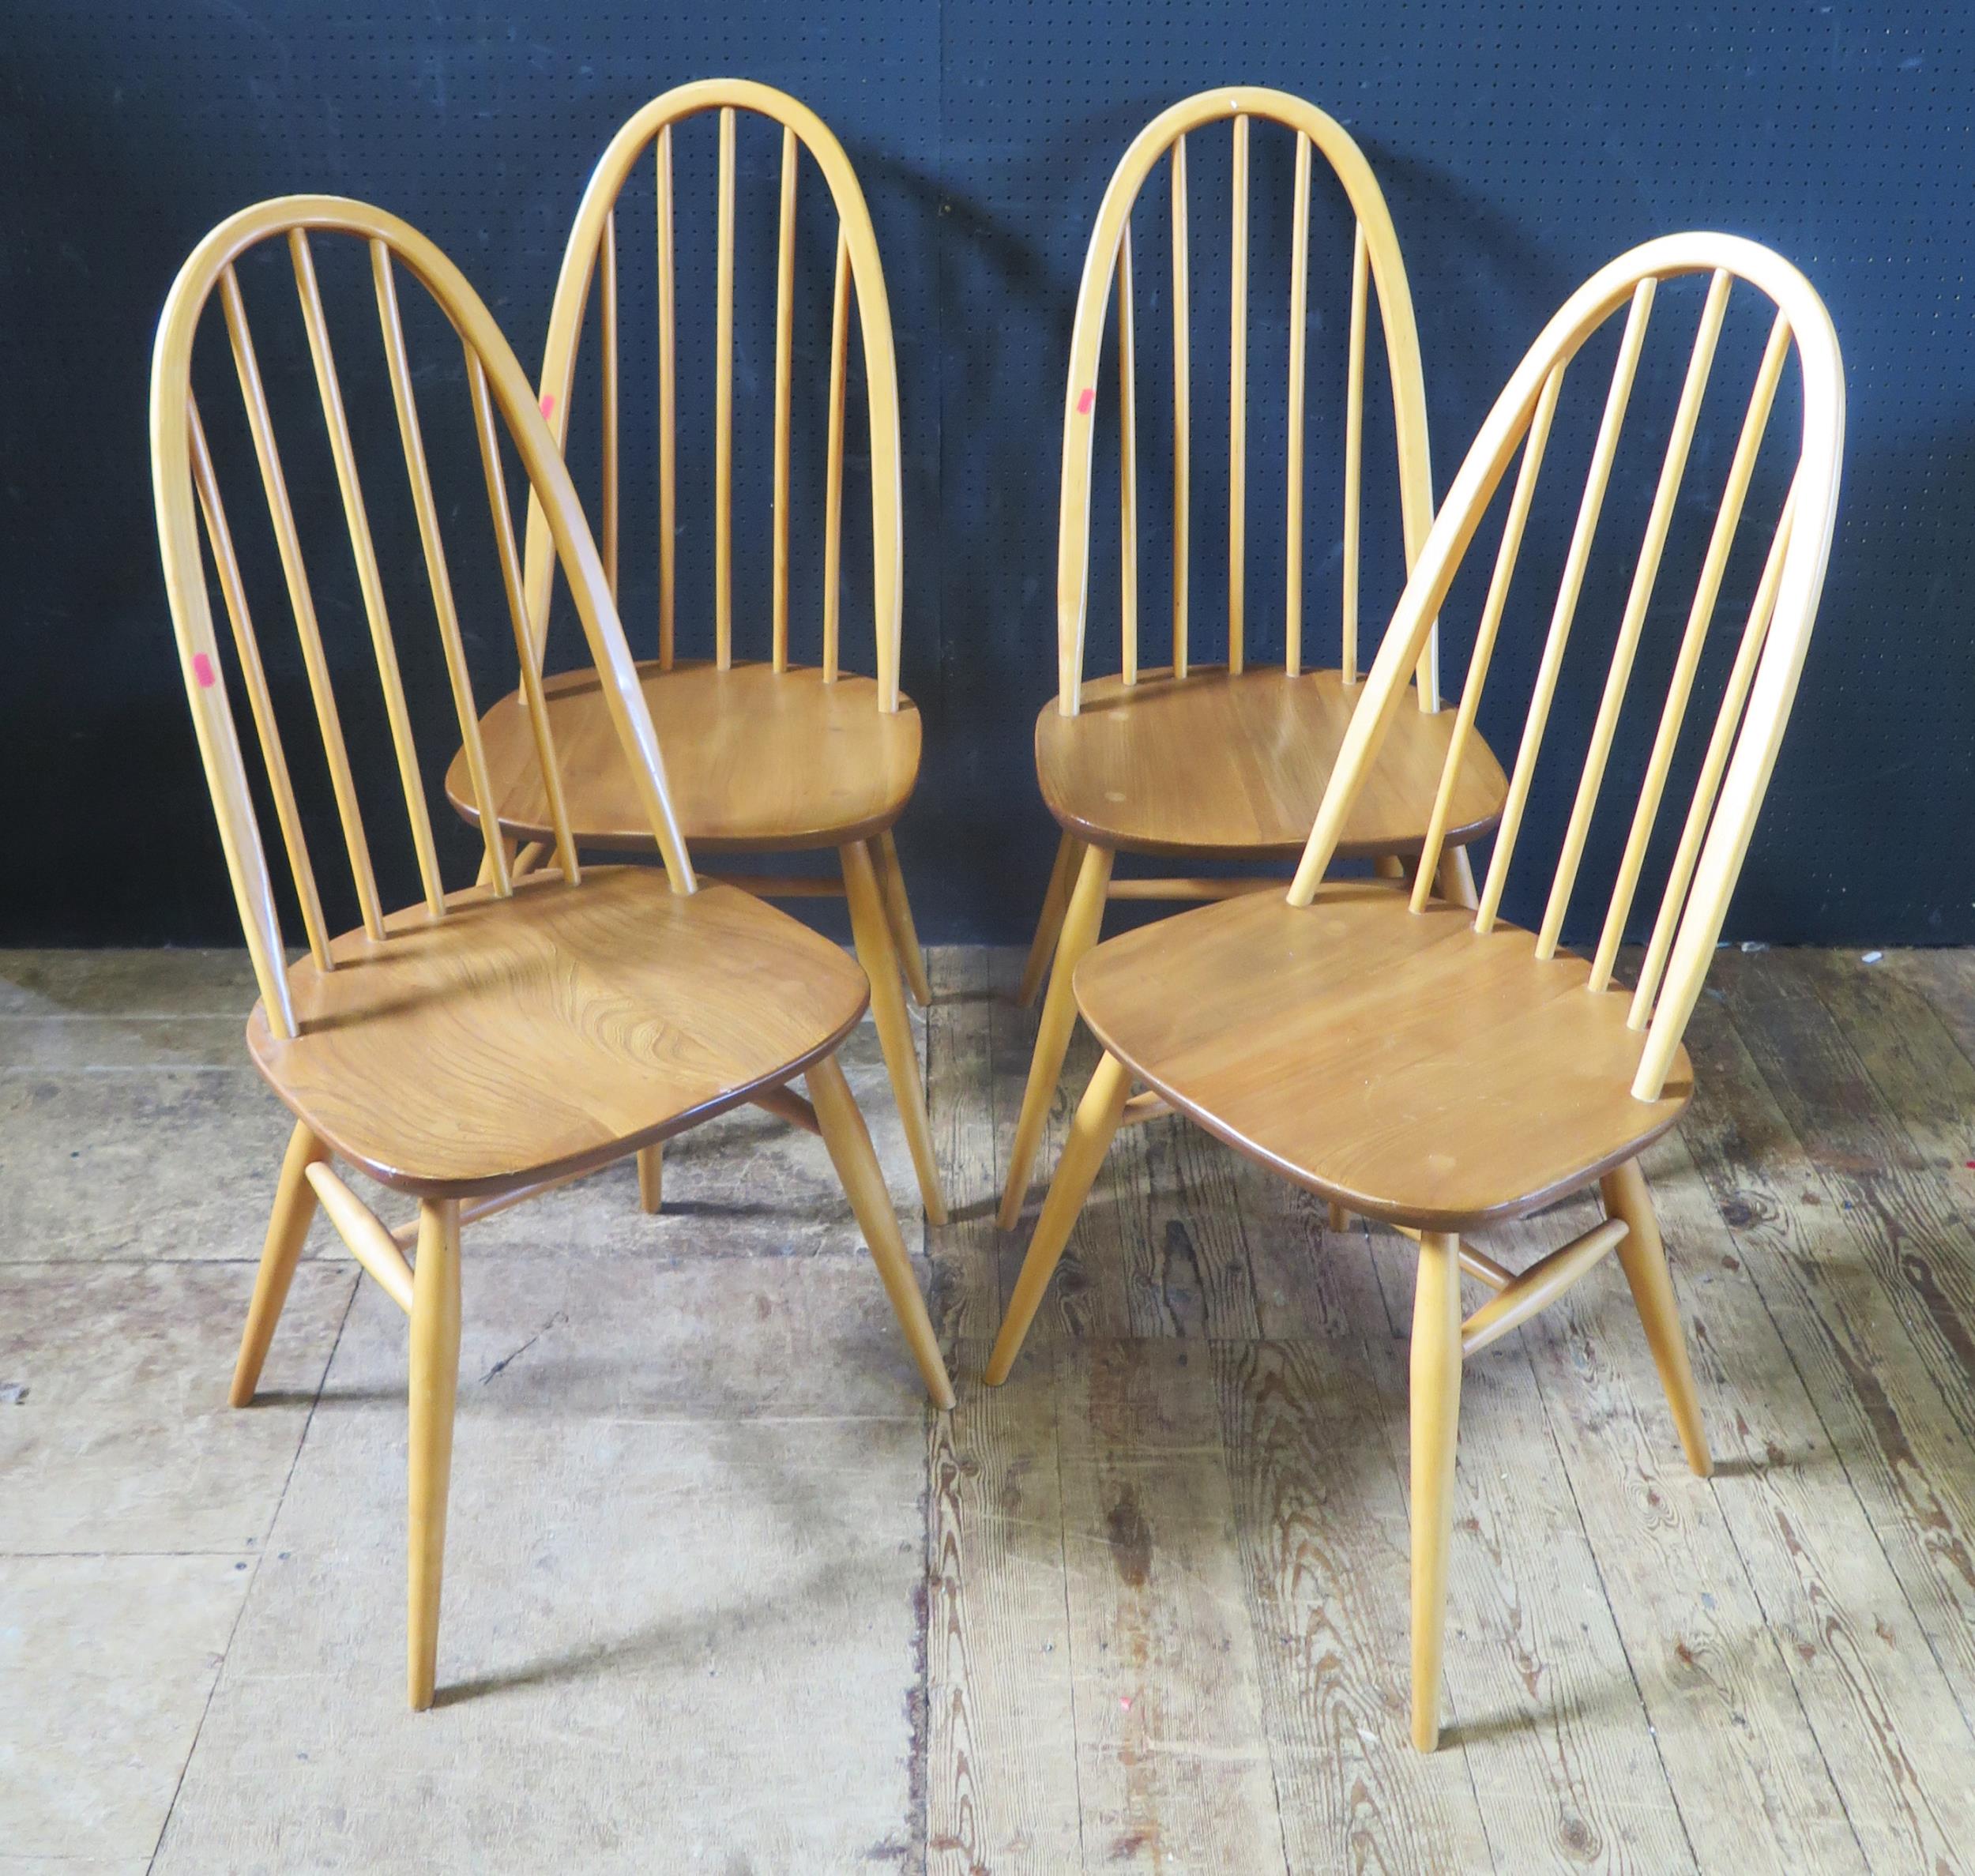 A Set of Four Ercol High Spindle Back Chairs